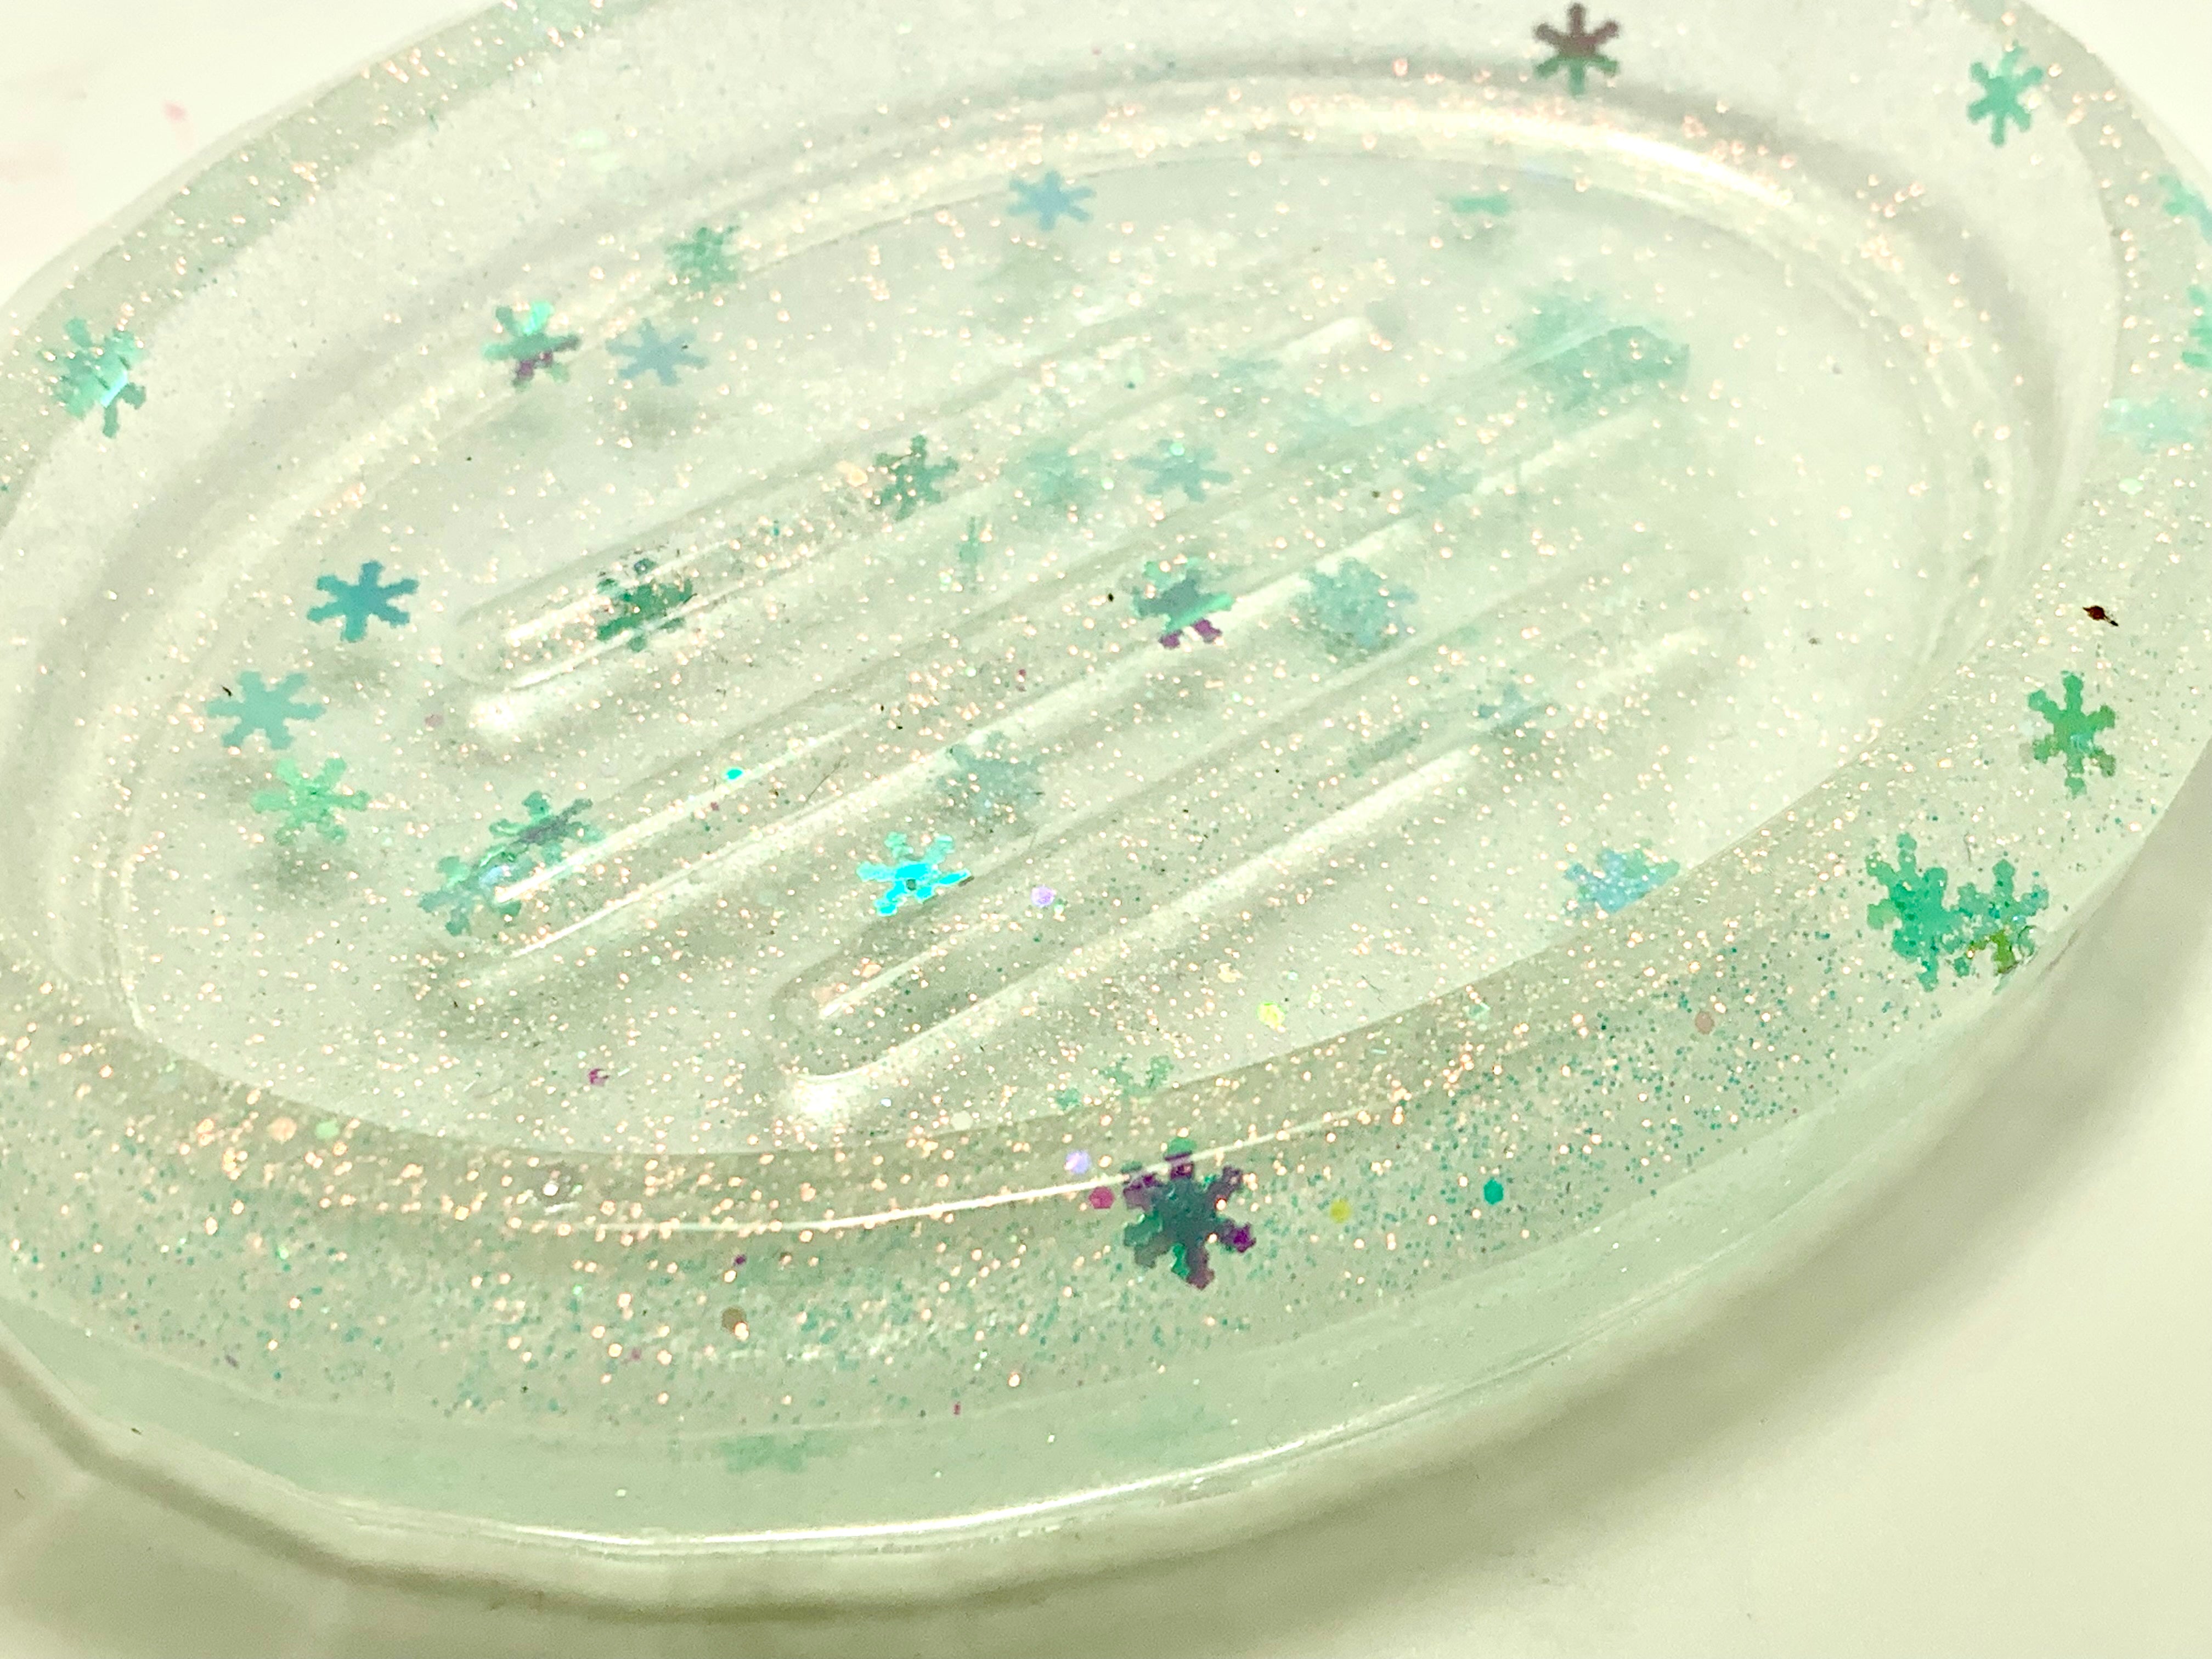 Opalescent Snowflakes Soap Dish